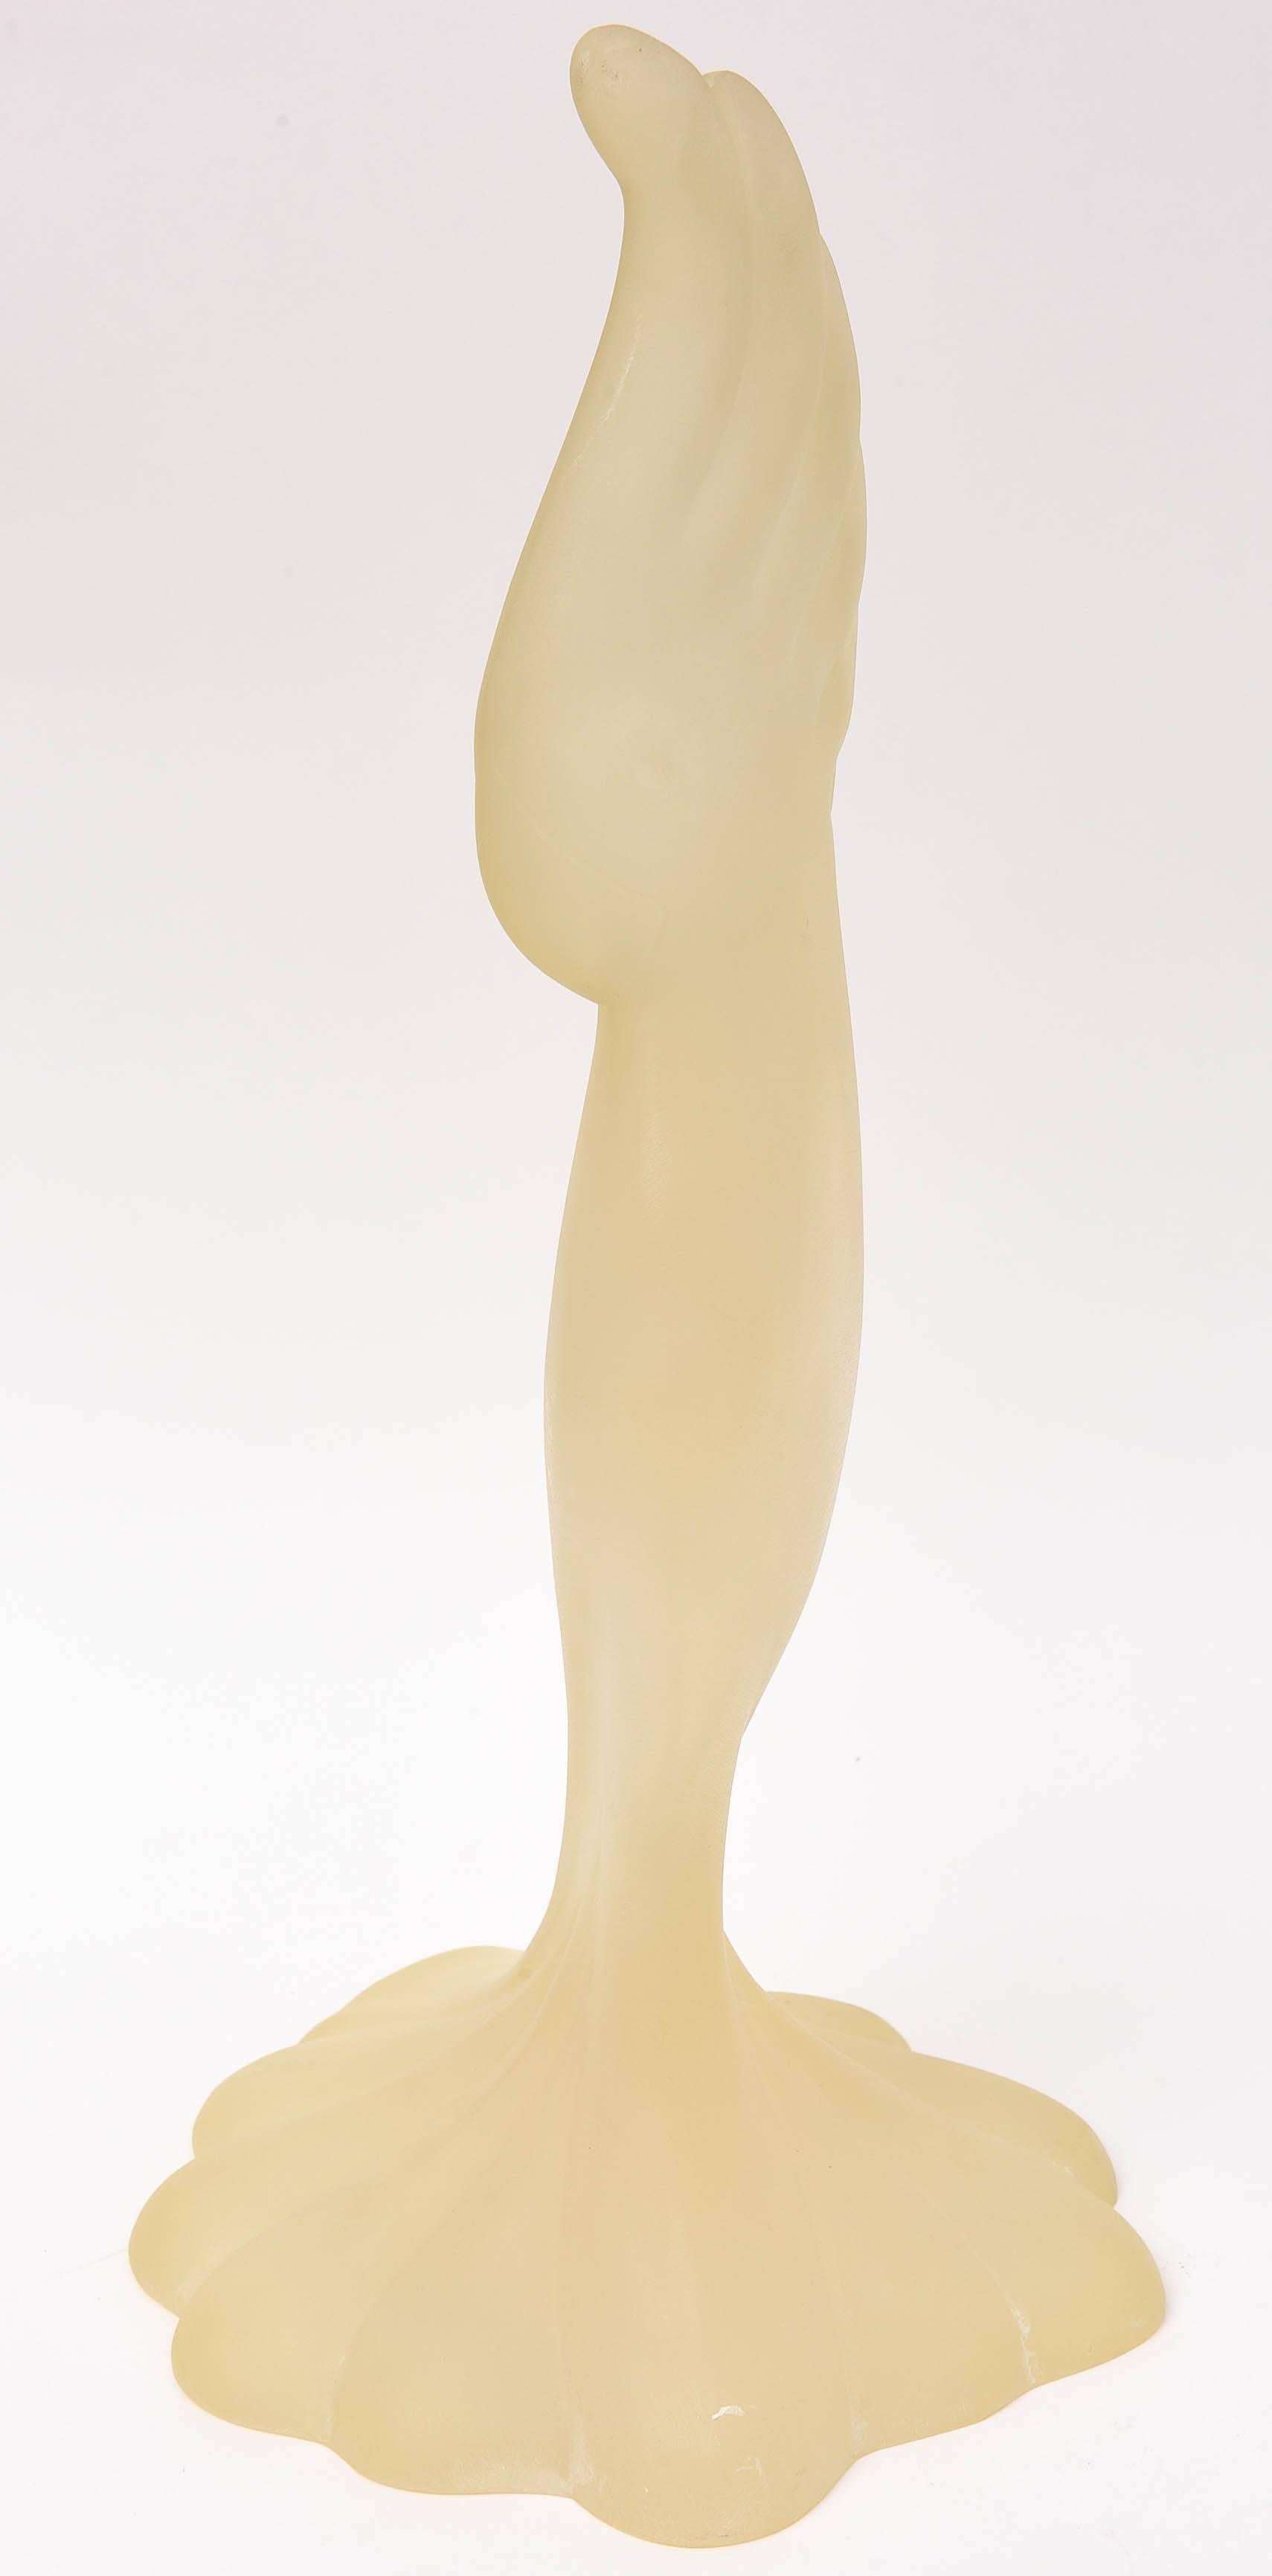 Machine-Made Mid Century Modern Resin Sculpture of a Parrot, Tall and Elegant